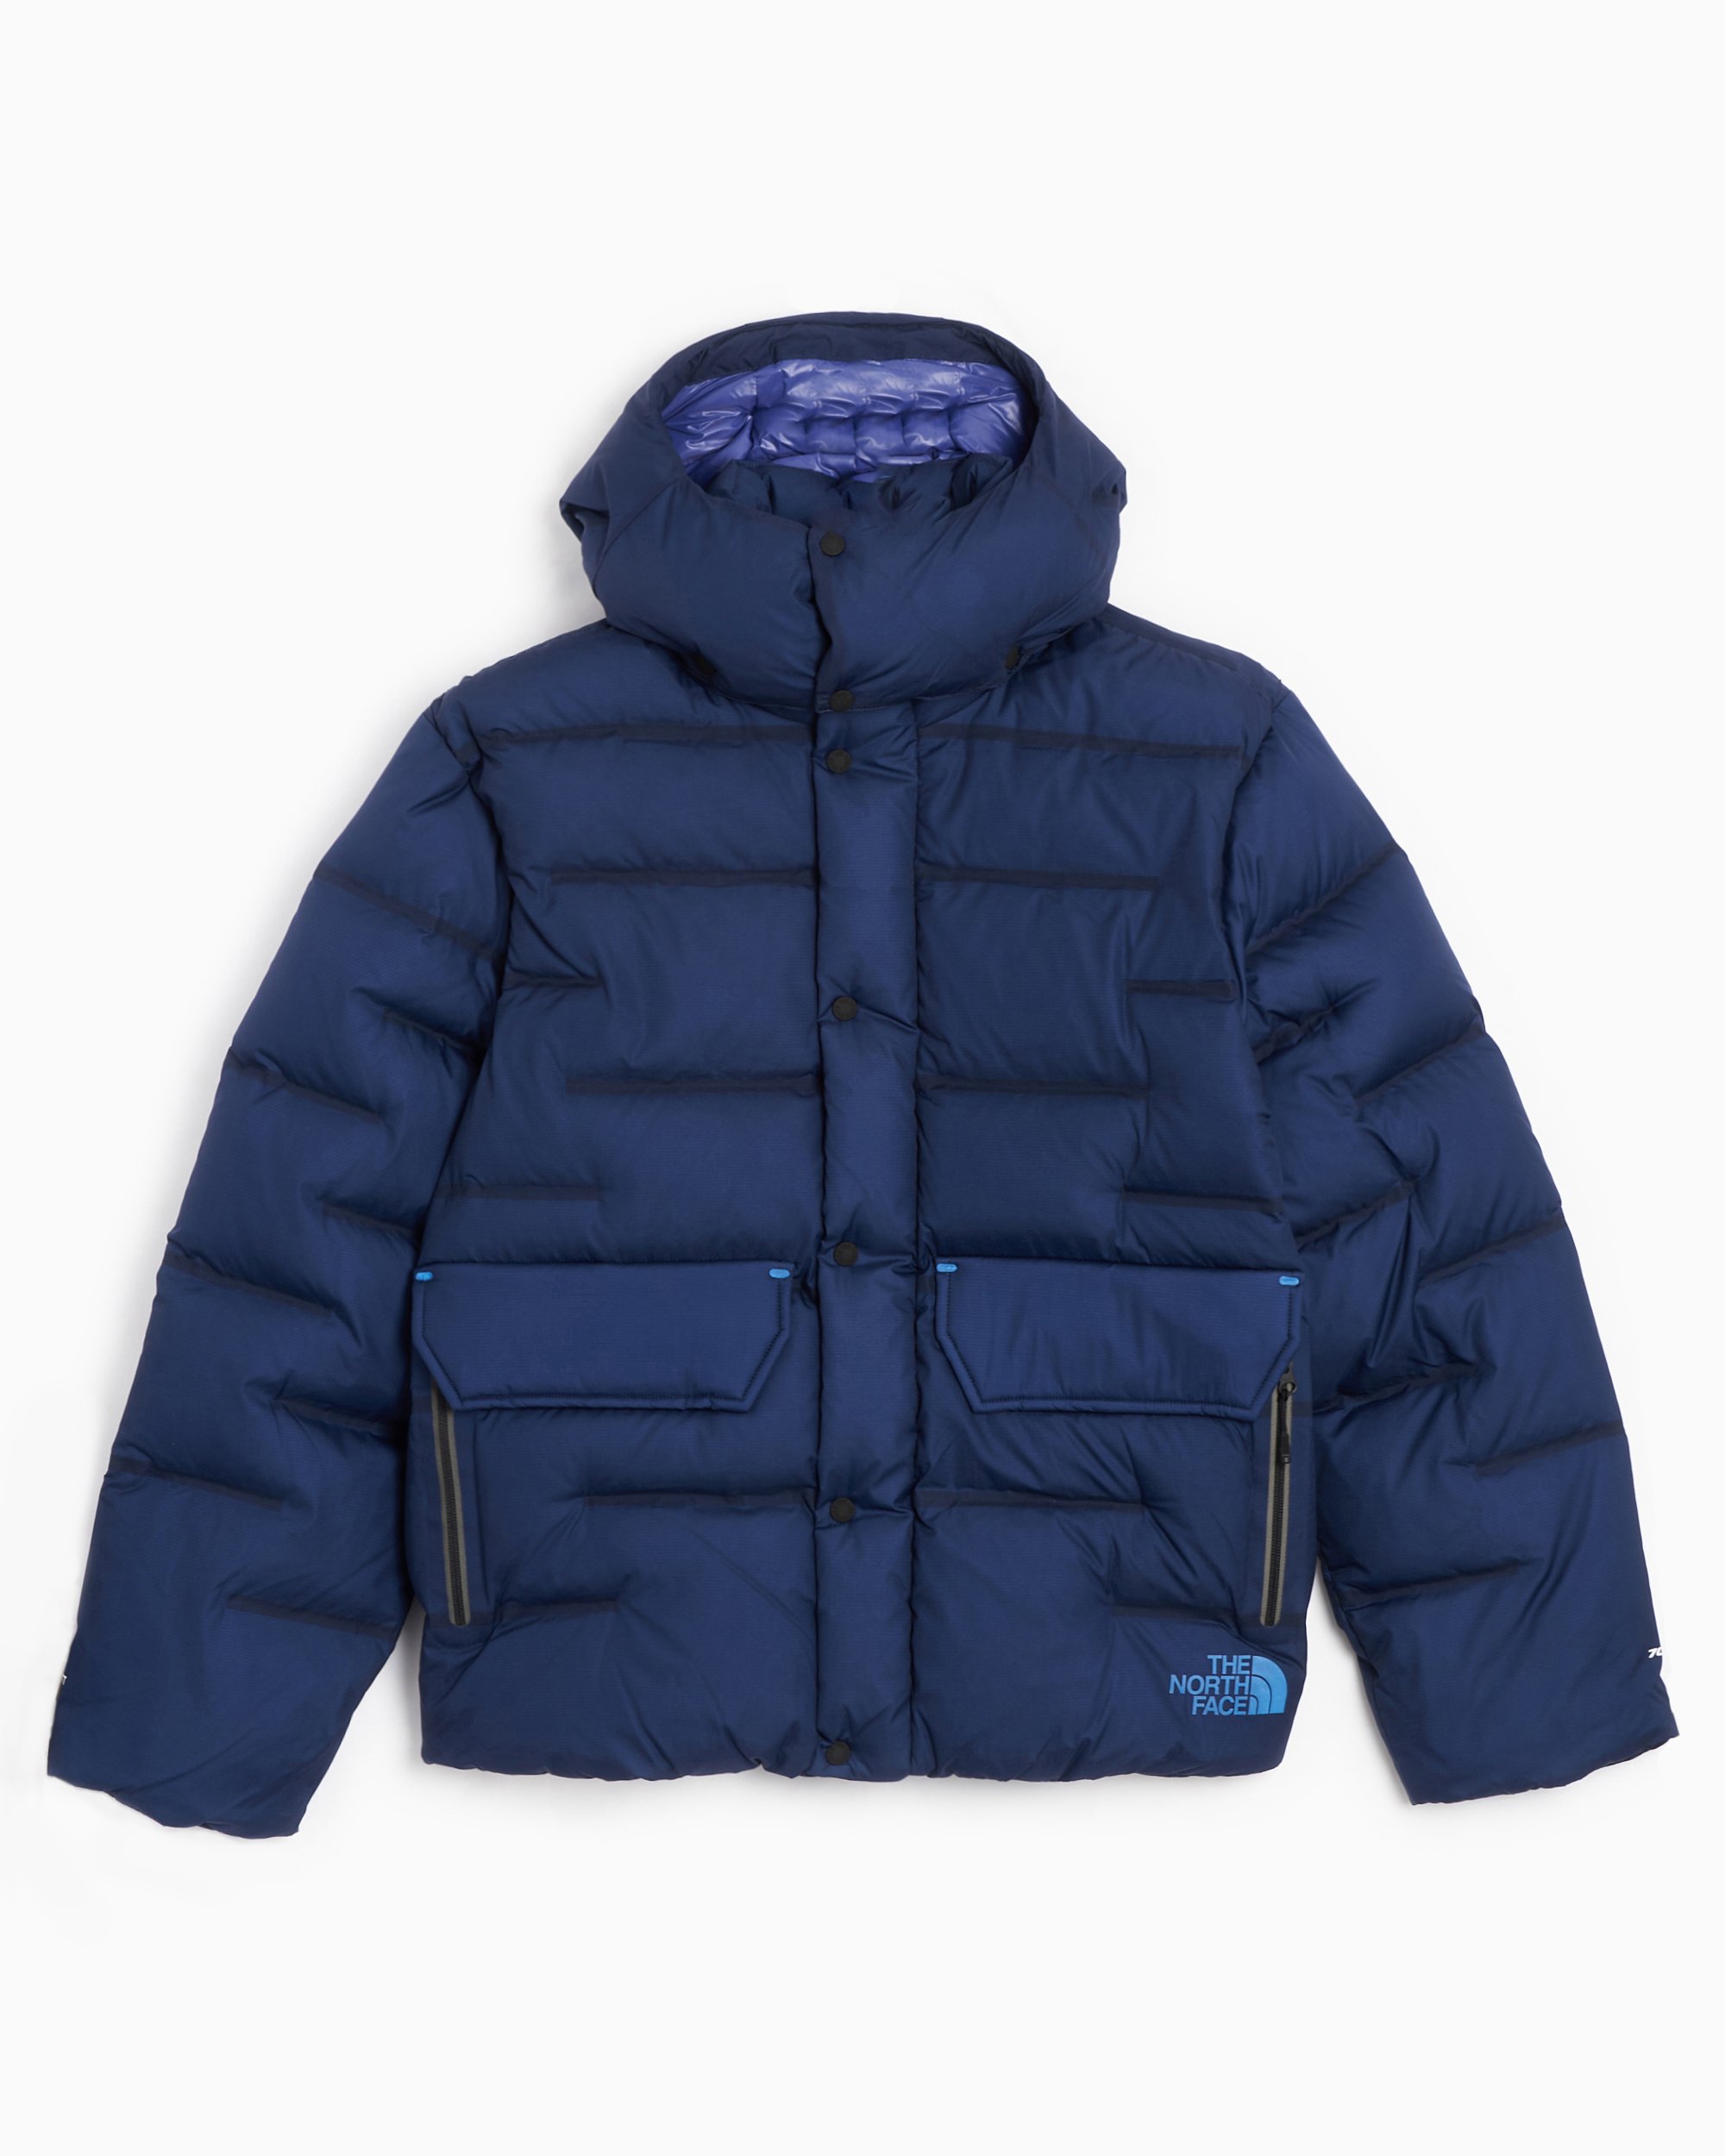 THENOrm-7341) THE NORTH FACE Mountain Jacket